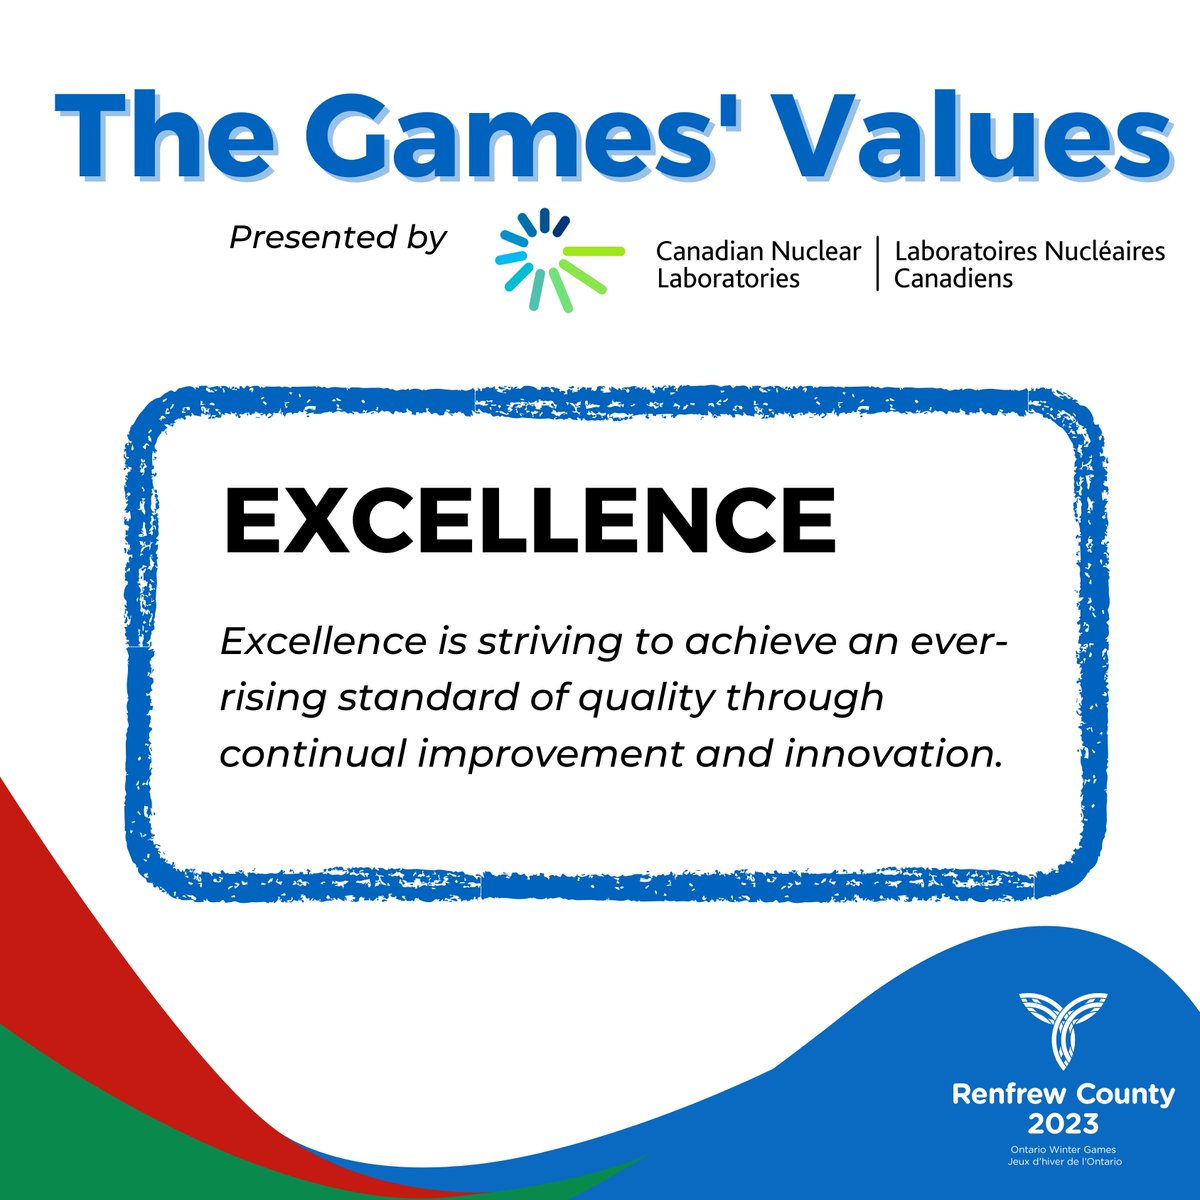 ICYMI: Whether an athlete, coach, volunteer or a fan, CNL and OWG want everyone involved to strive for excellence in your sport, and in life! For more information on what the @CNL_LNC Games’ Values mean visit: countyofrenfrew.on.ca/en/news/renfre…